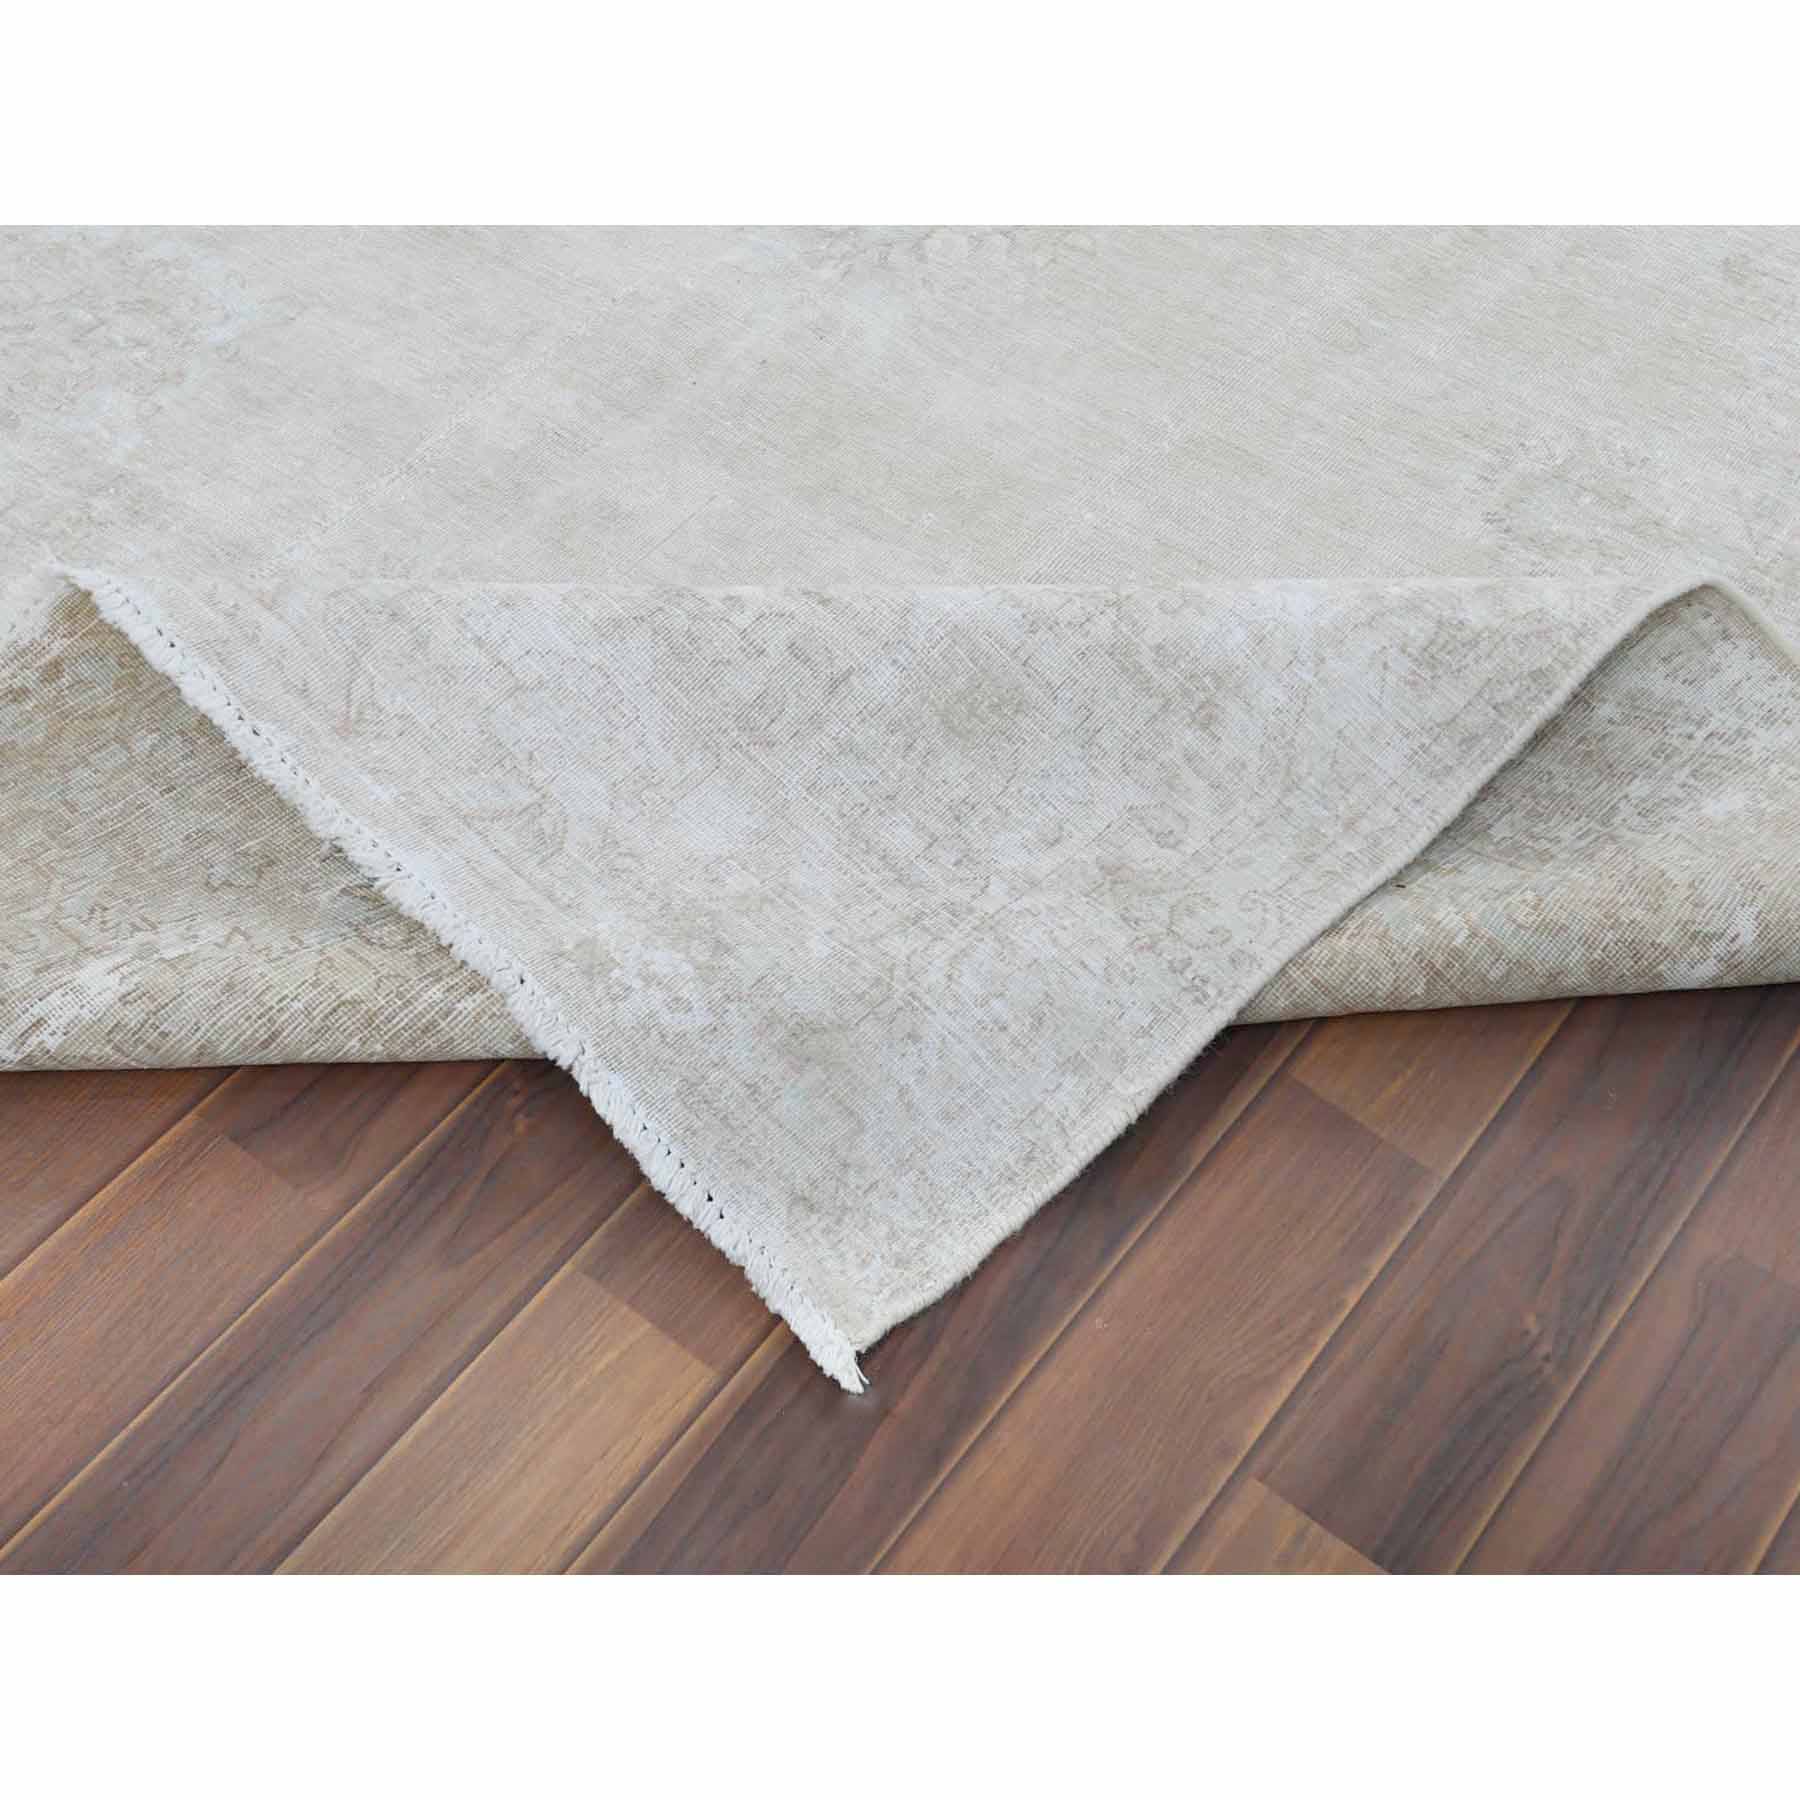 Overdyed-Vintage-Hand-Knotted-Rug-306700